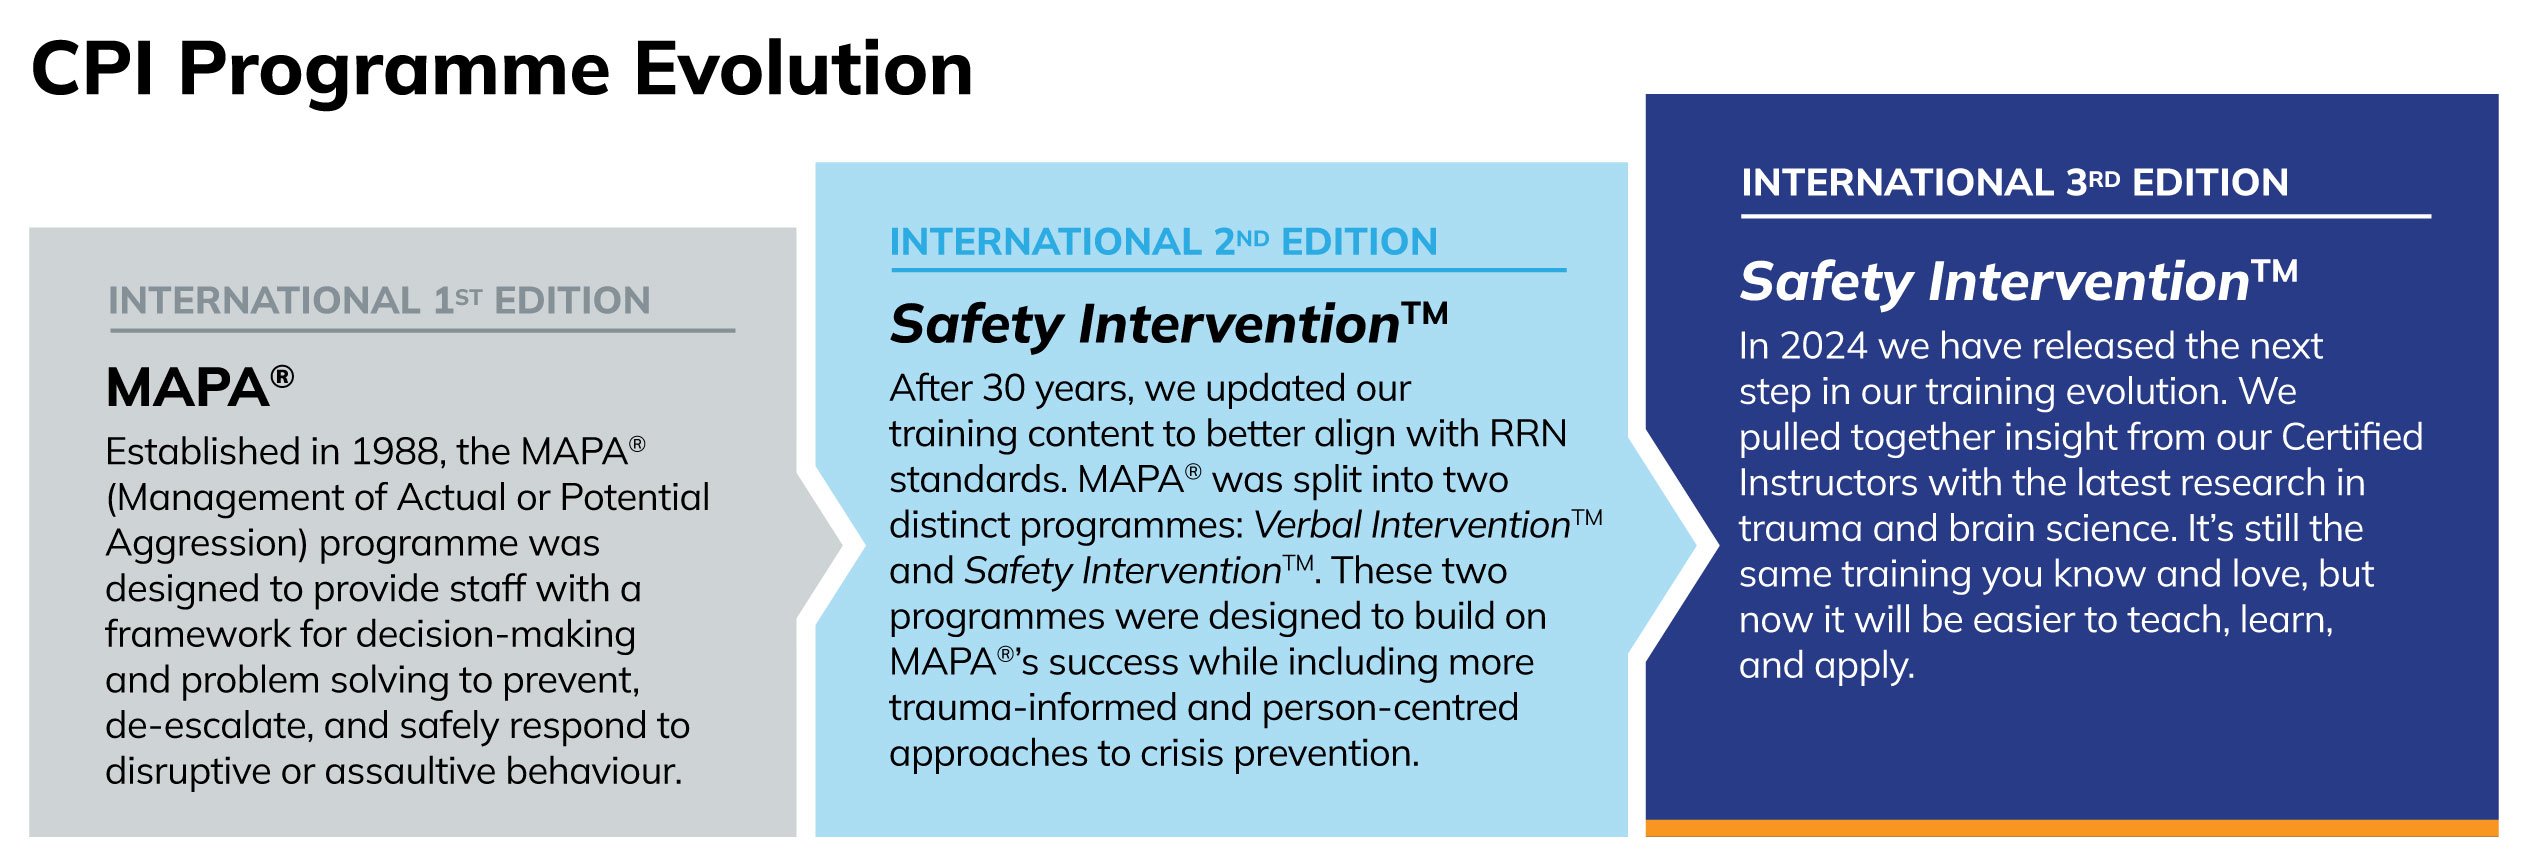 This is a graphic showing the evolution of the MAPA training programme over the years, from MAPA to Safety Intervention training programme. 